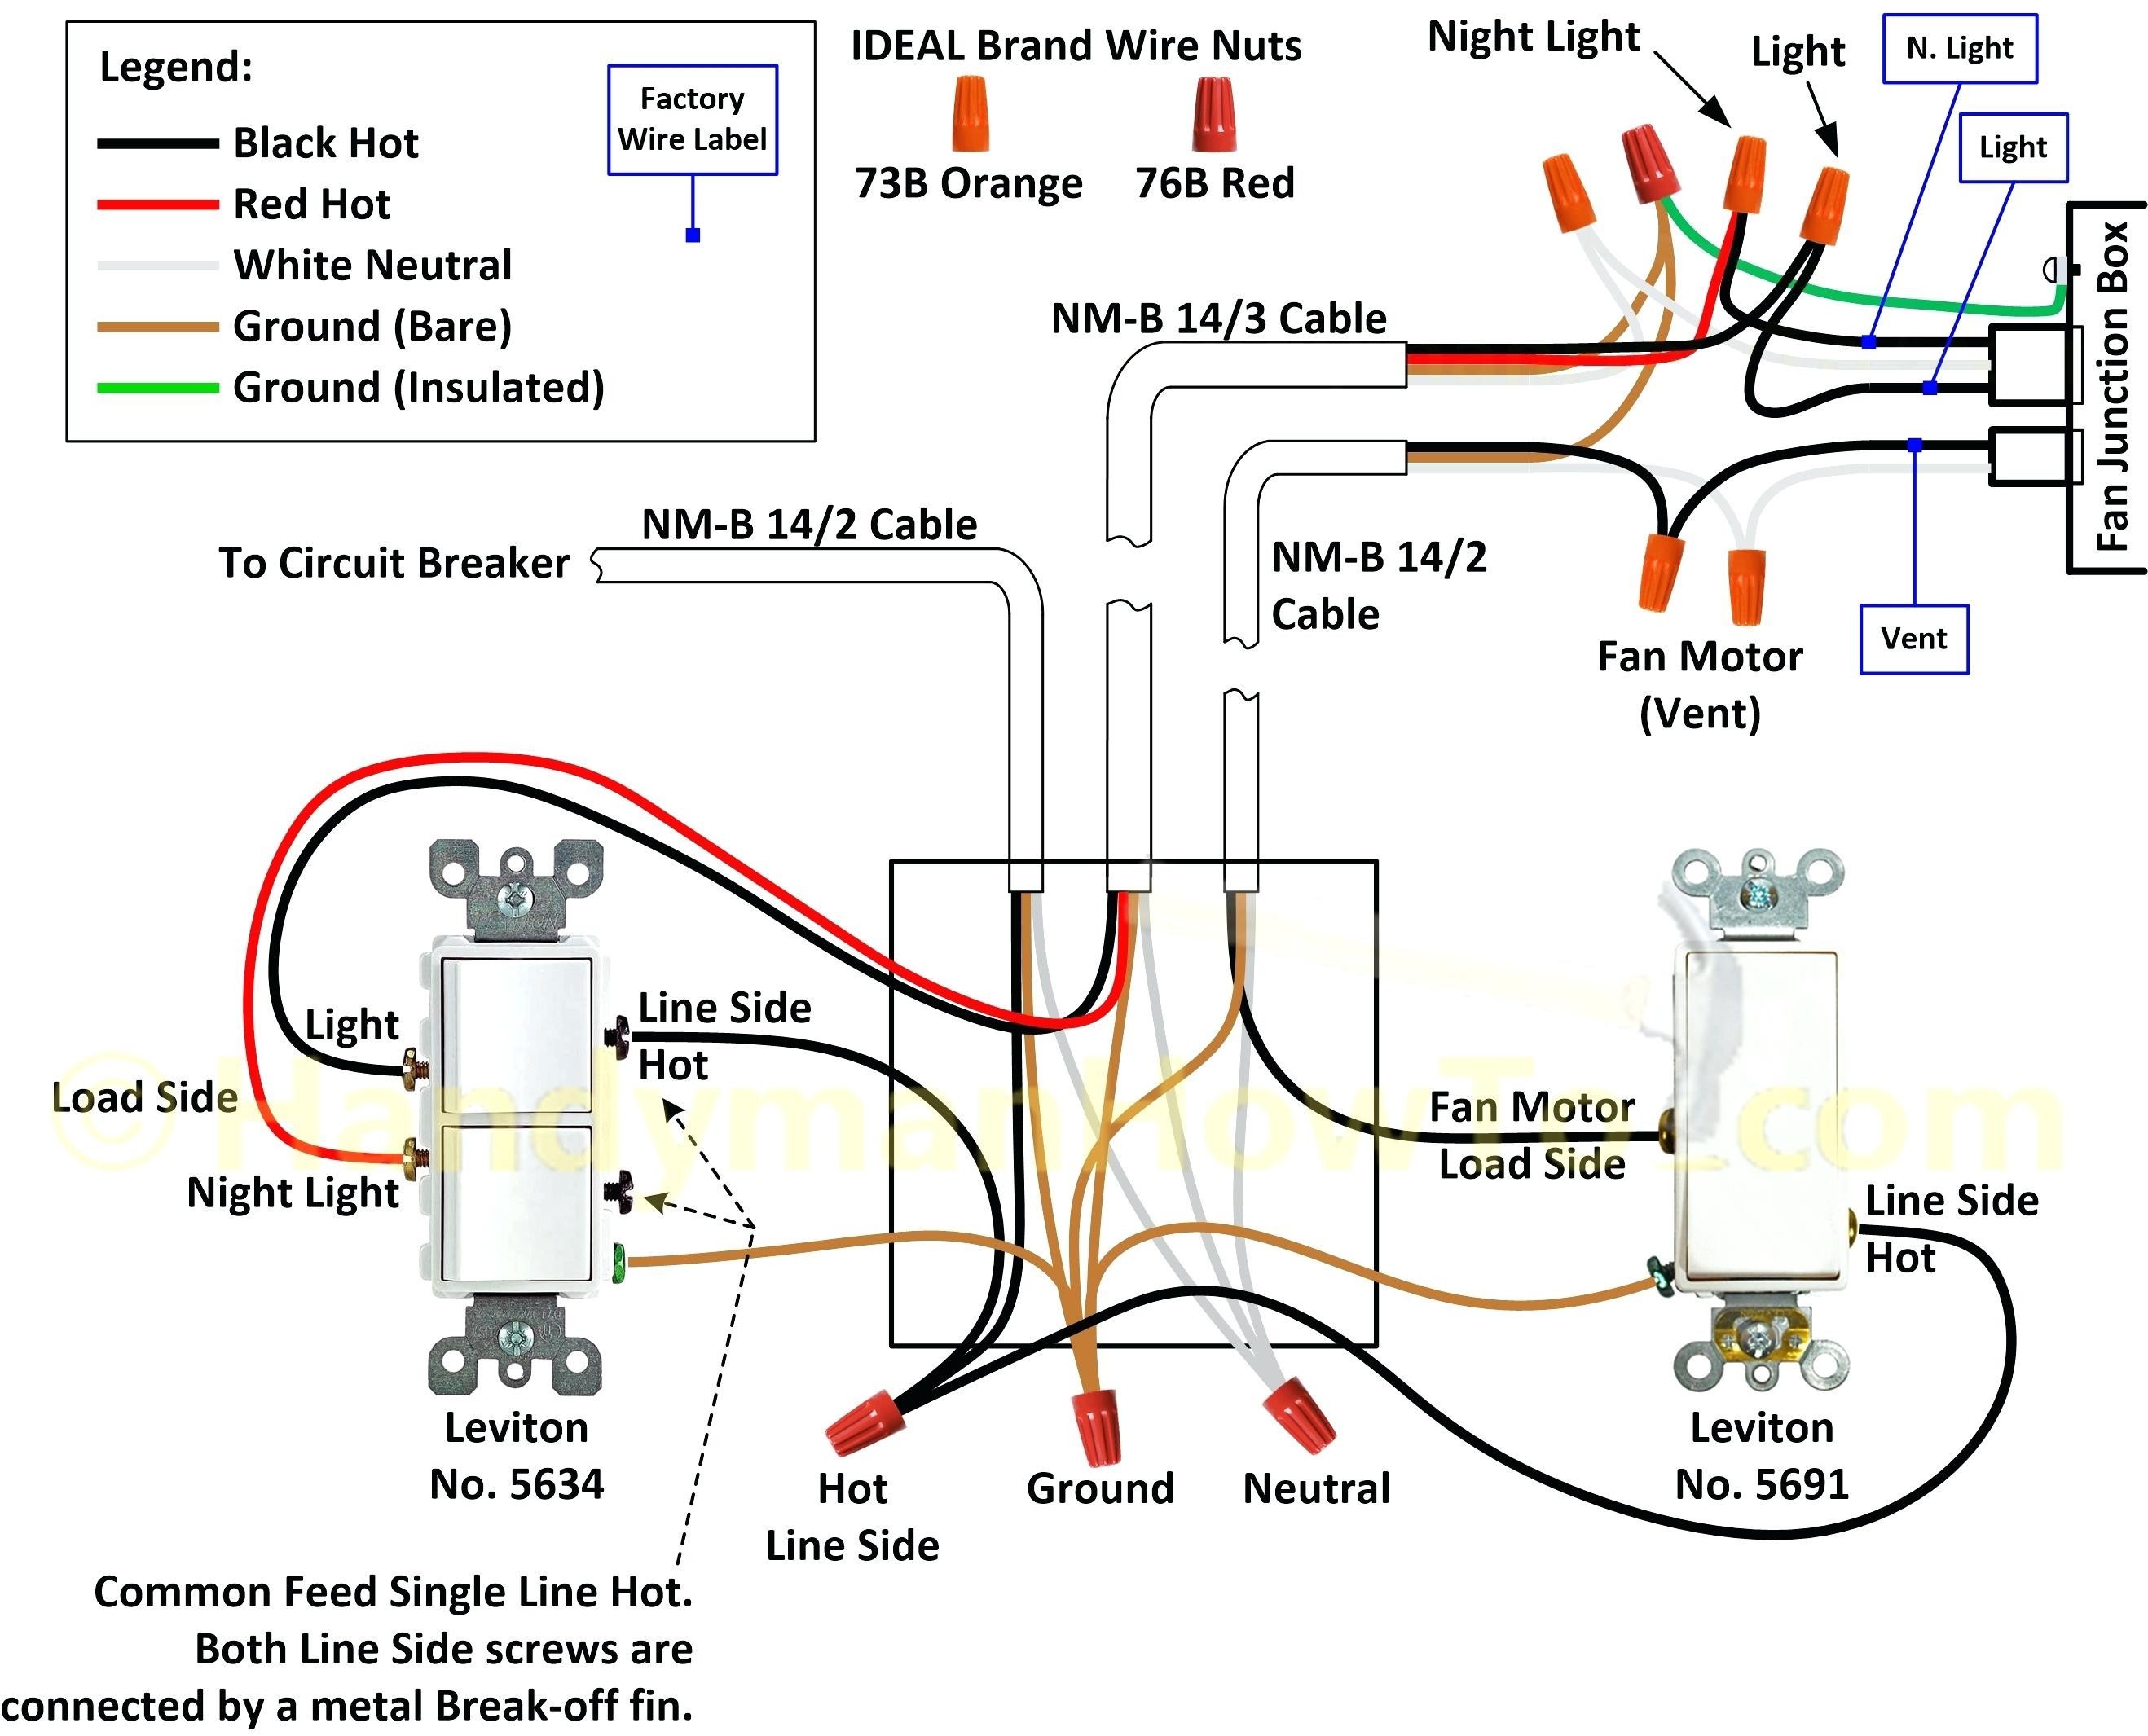 Wiring Diagram for Home Telephone Best Wiring Diagram for House Phone Saving Bt Home Phone Wiring